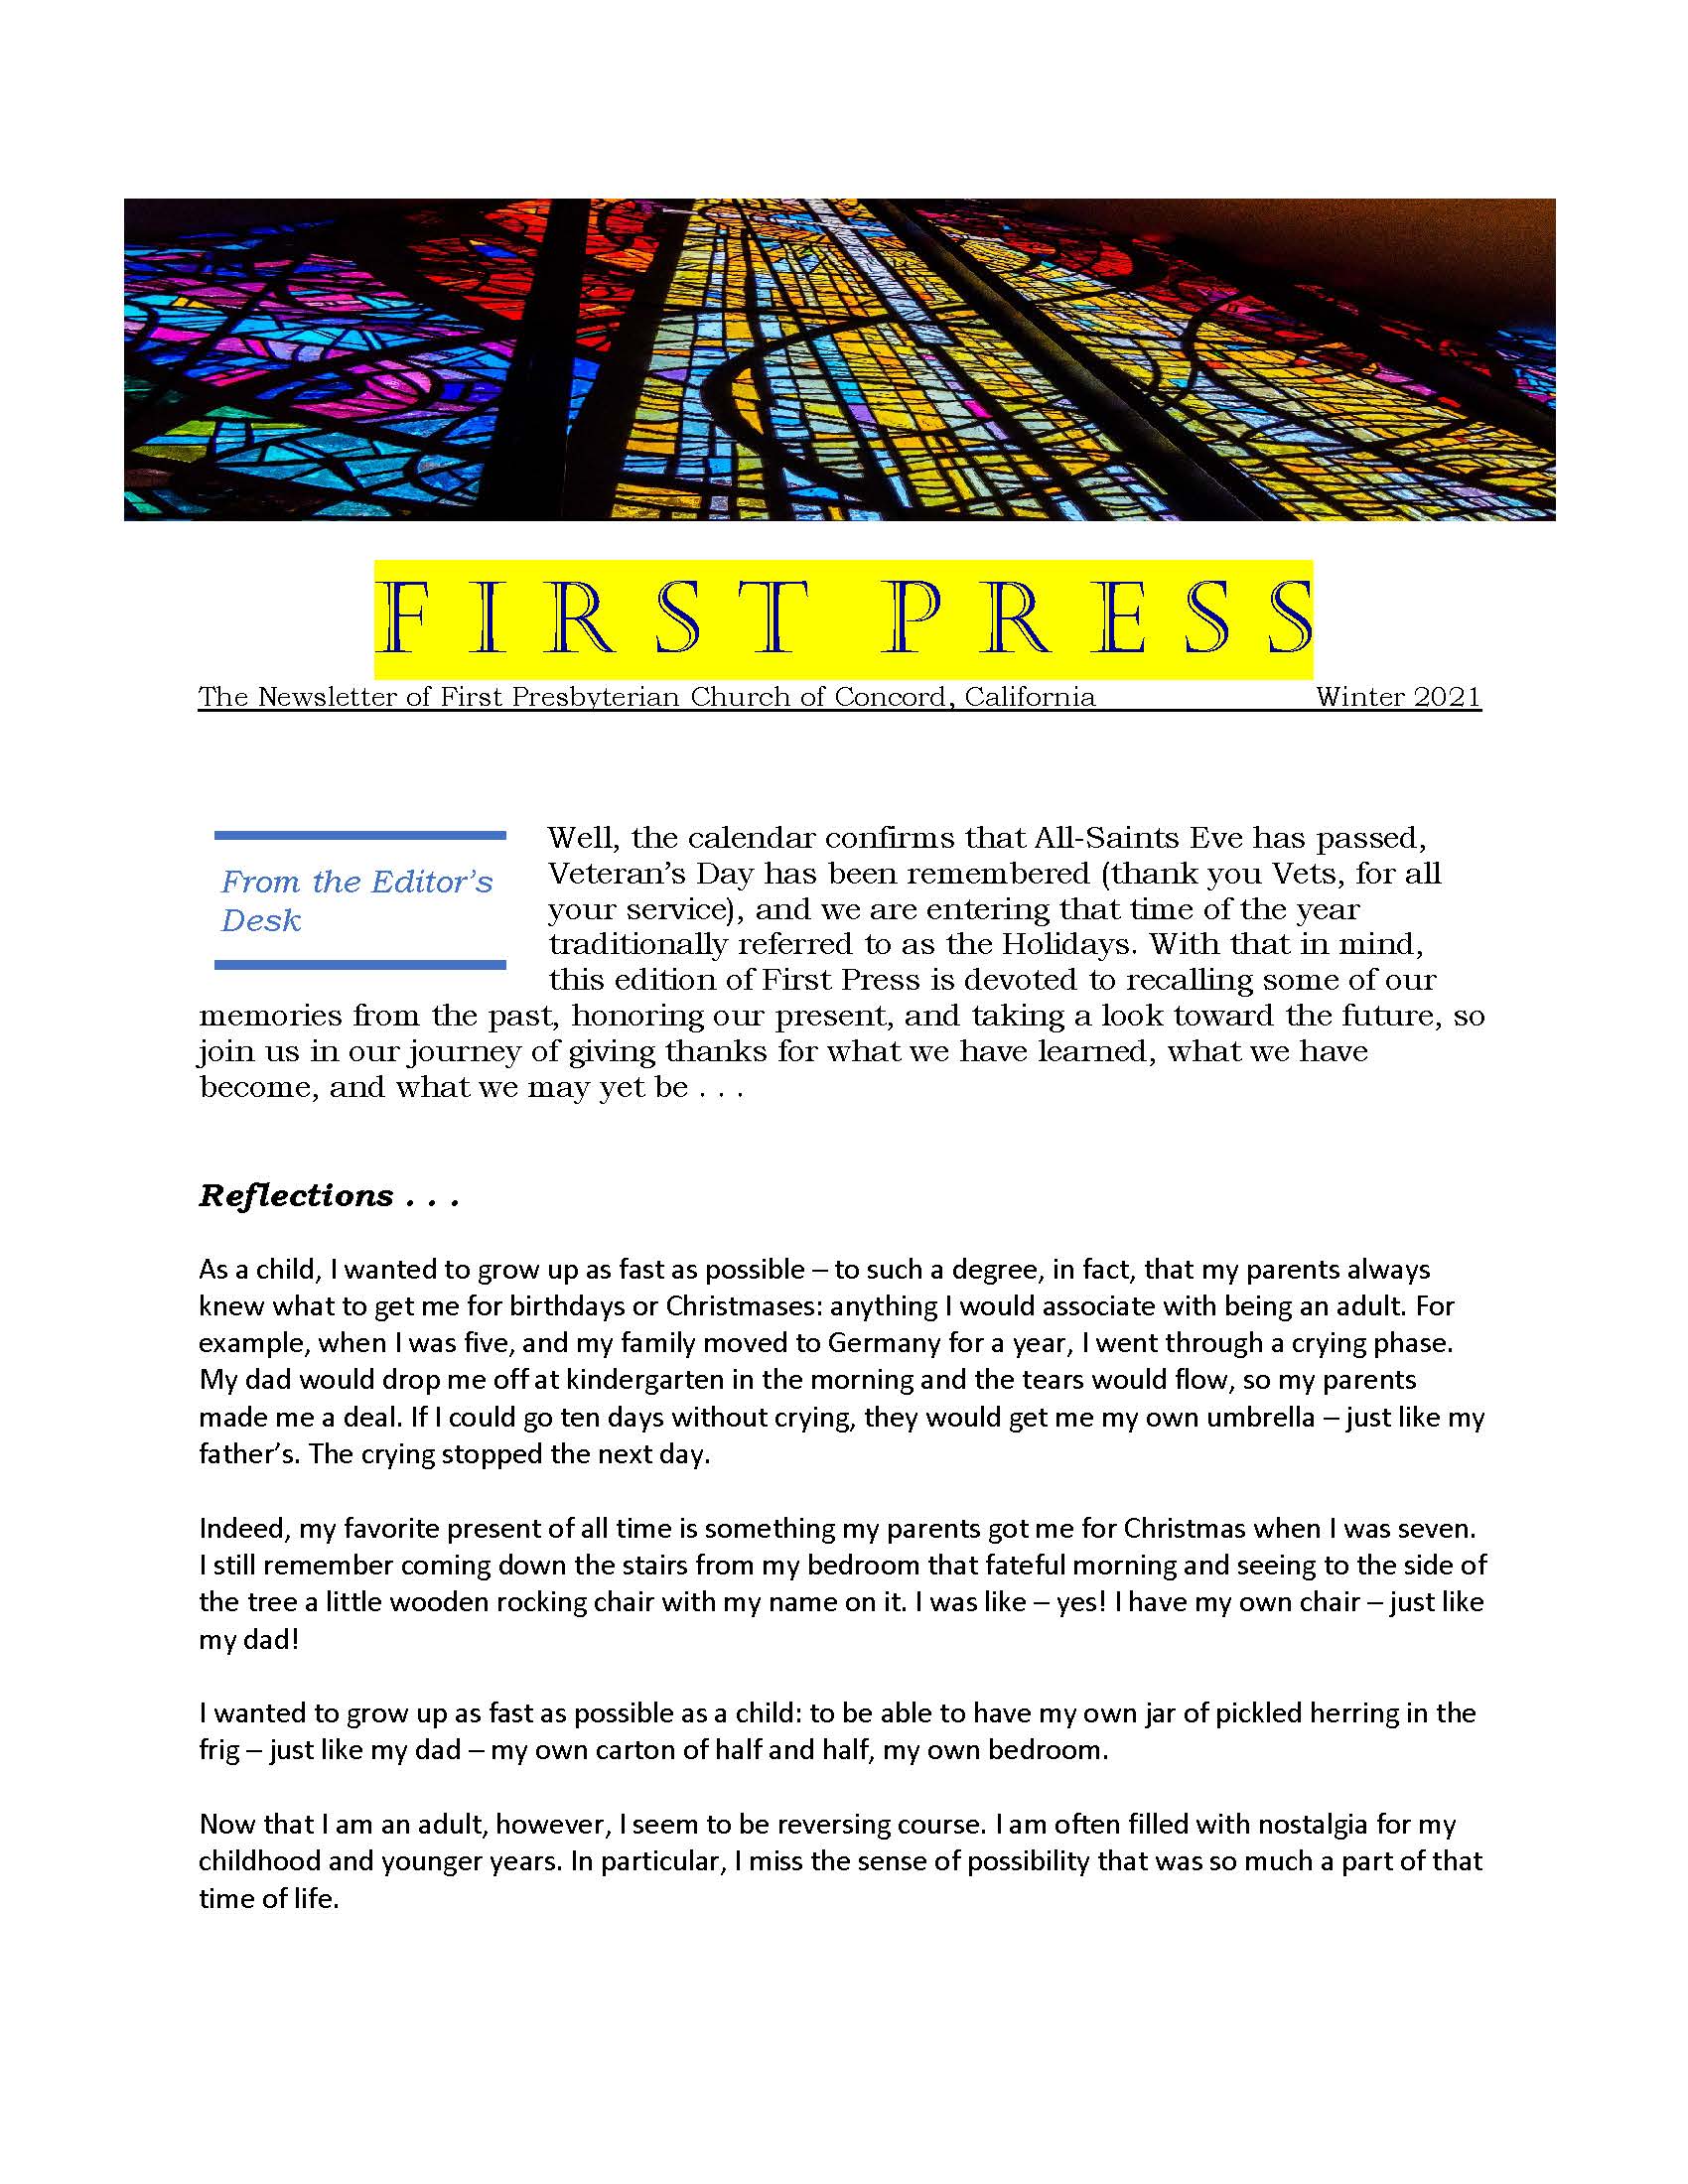 The cover page of First Press Winter 2021